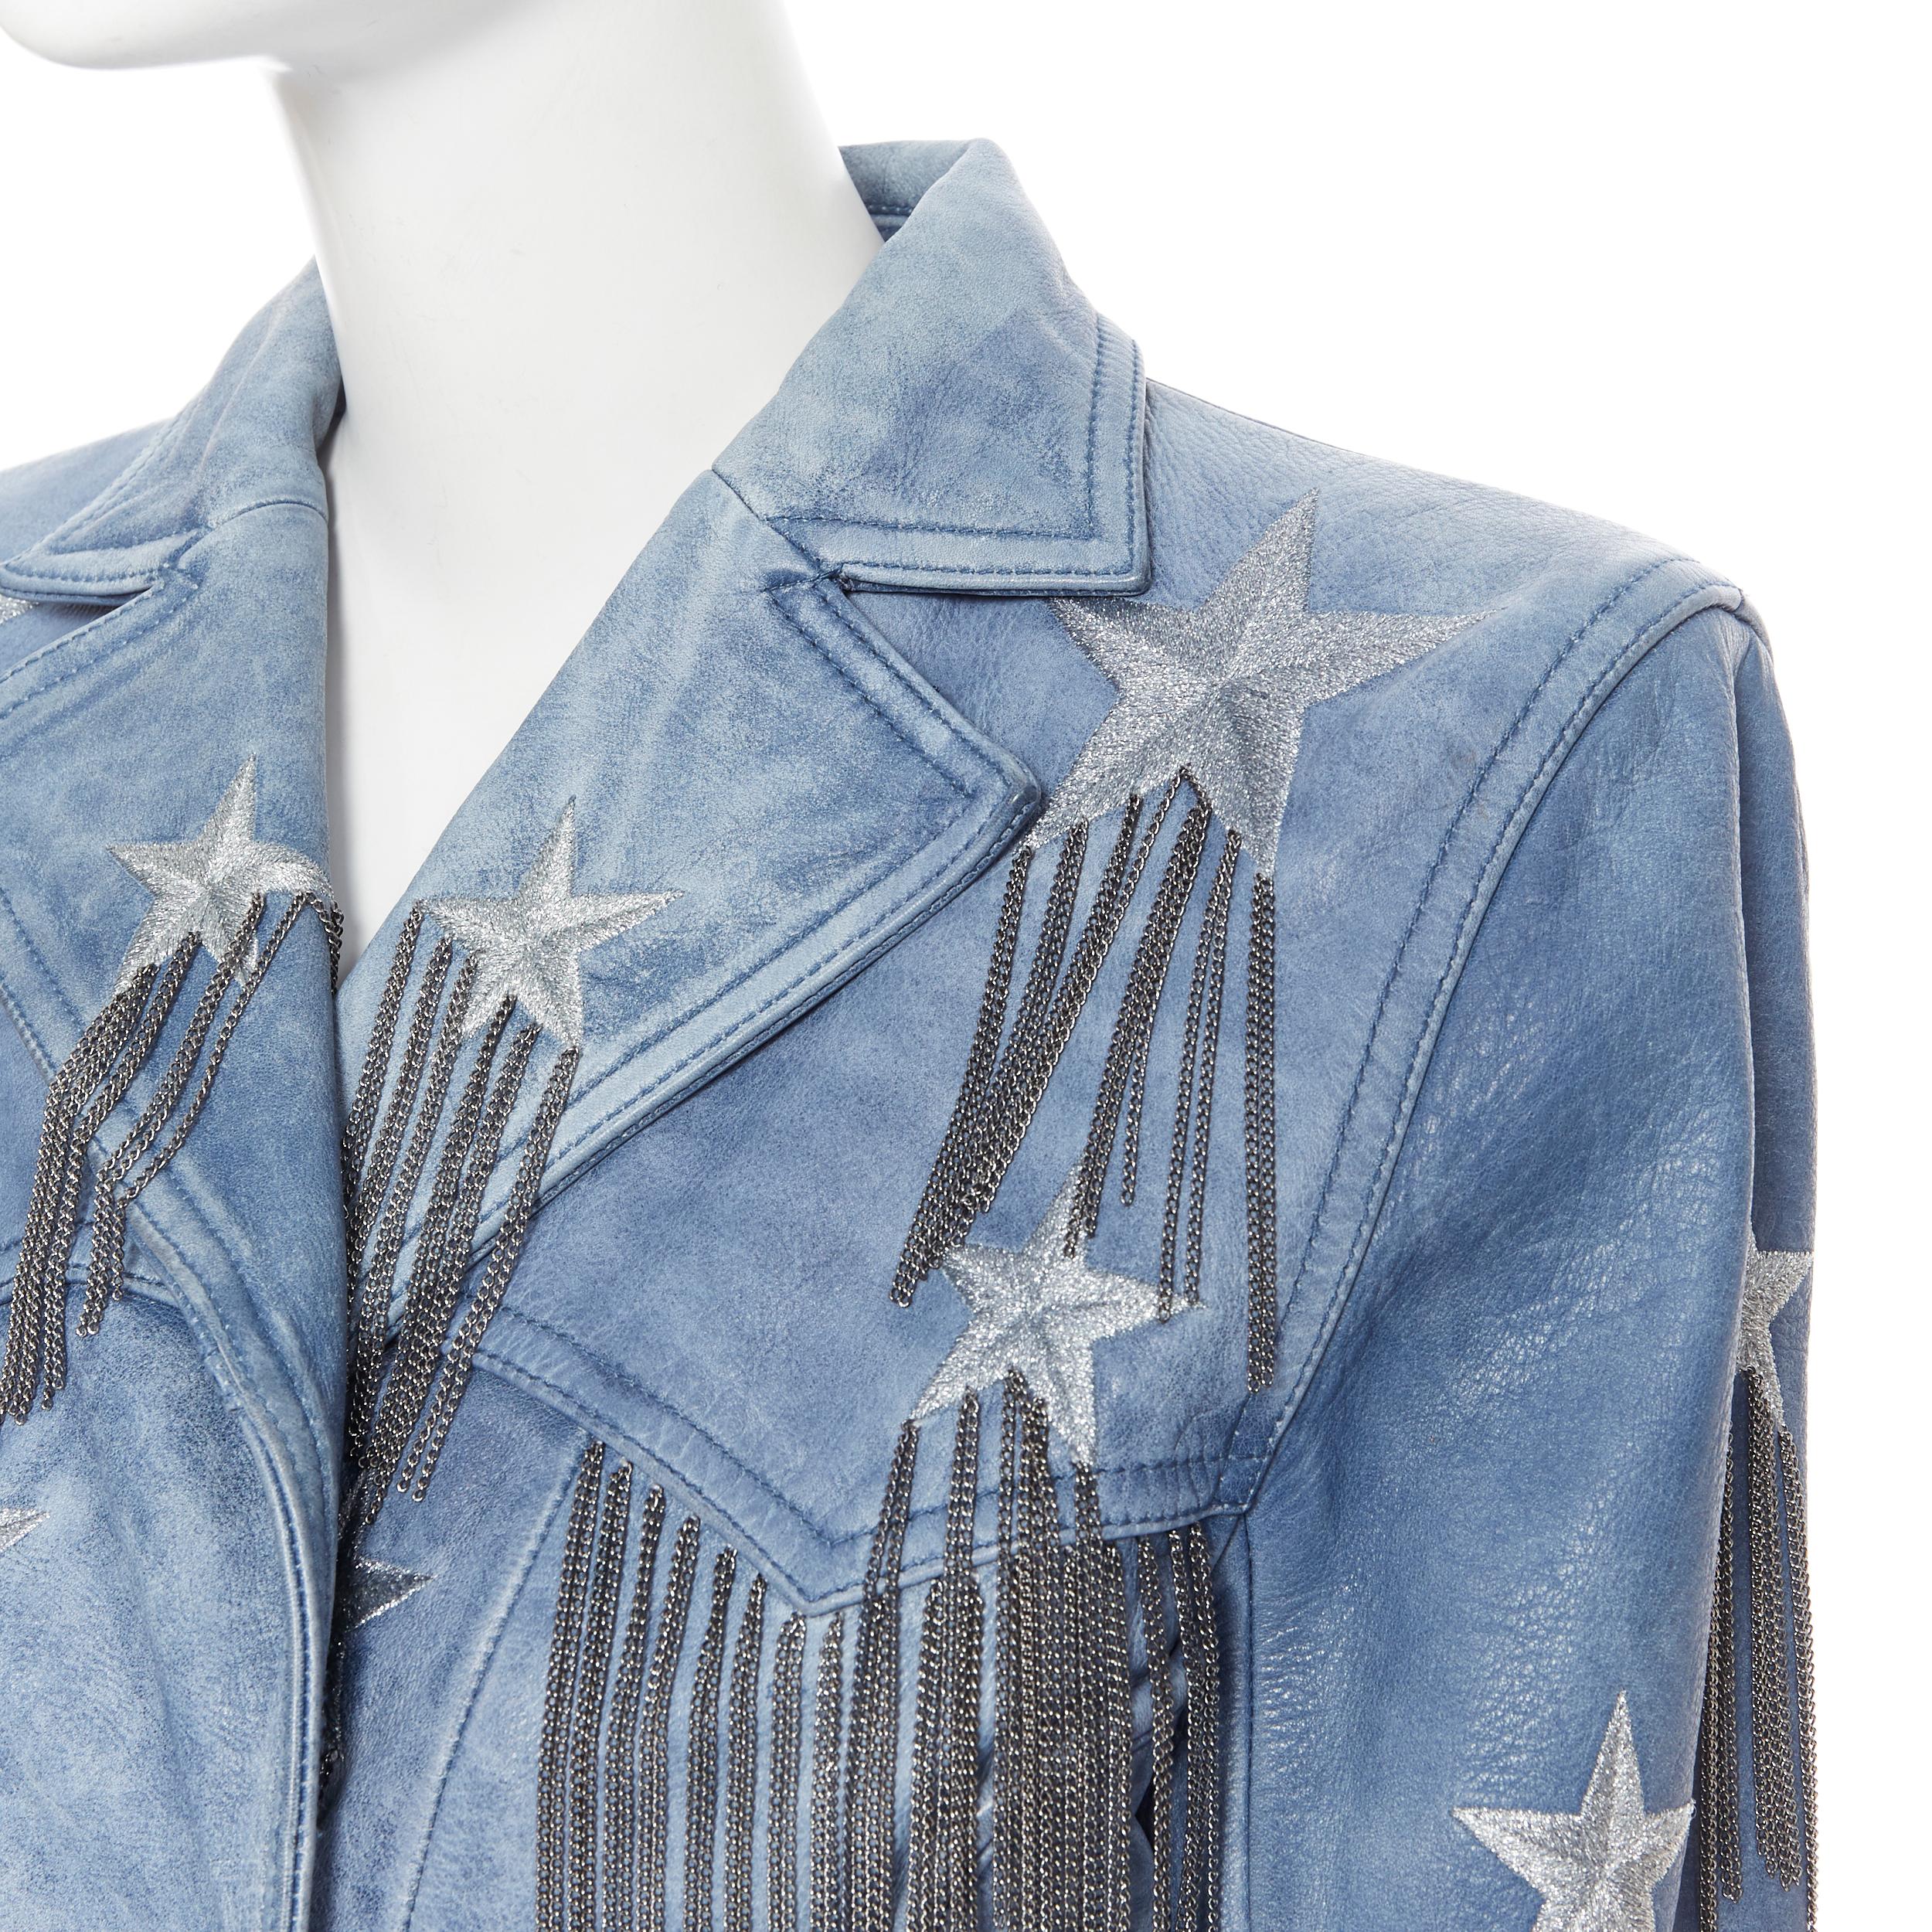 new BALMAIN  blue star chain embellished double breasted leather biker FR40 M
Brand: Balmain
Designer: Olivier Rousteing
Model Name / Style: Leather biker
Material: Leather; cow
Color: Blue
Pattern: Other; star
Closure: Button
Extra Detail: BALMAIN